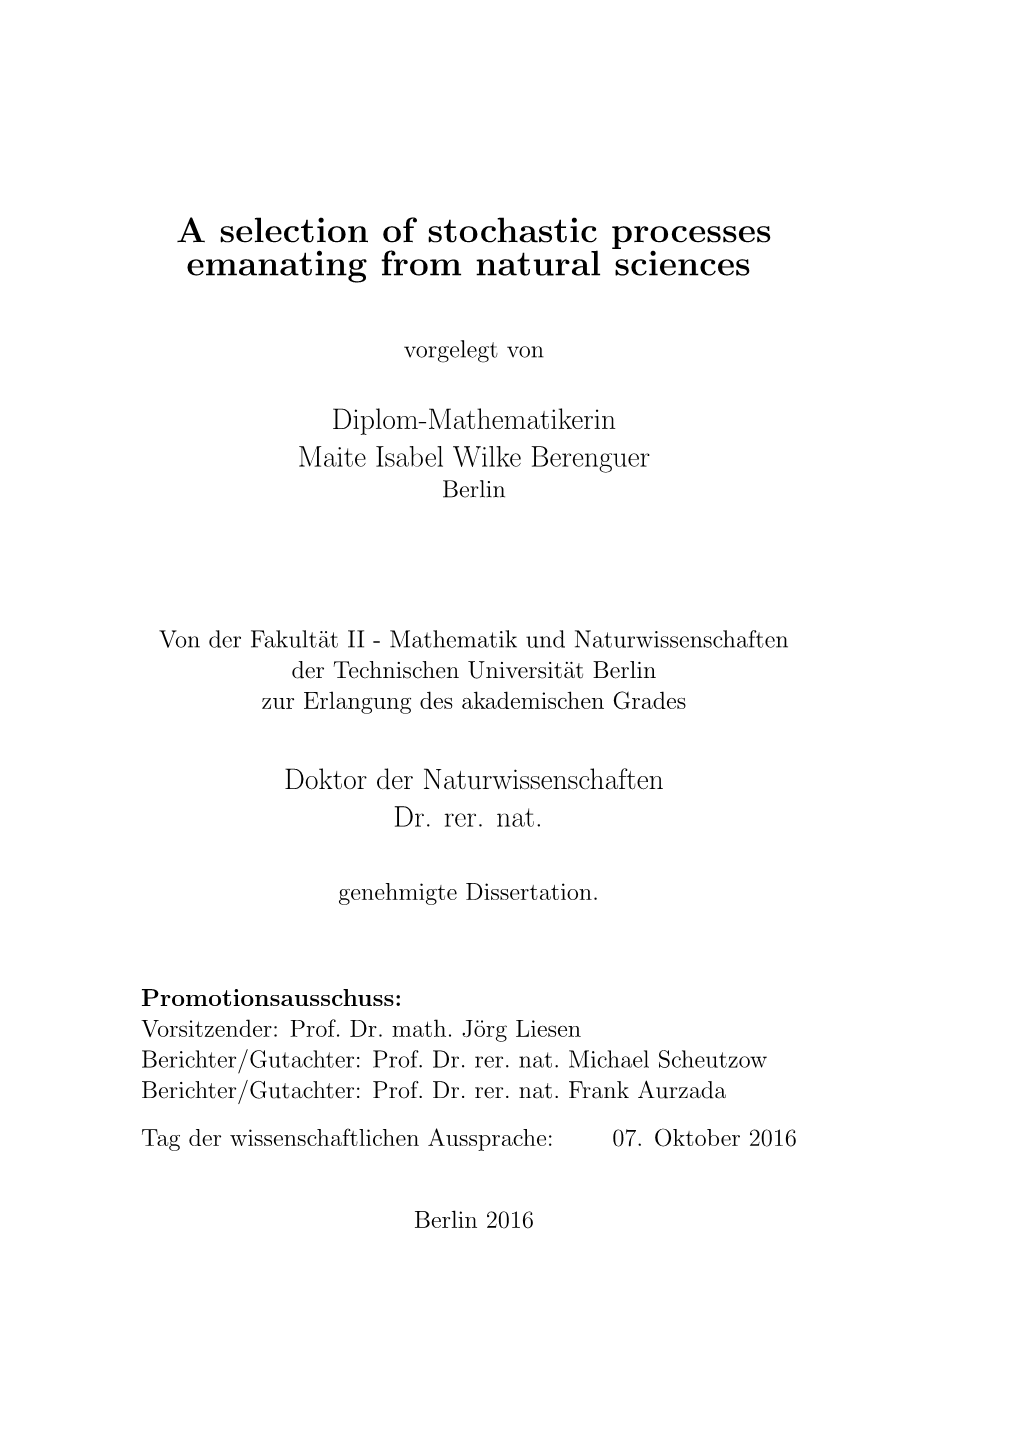 A Selection of Stochastic Processes Emanating from Natural Sciences